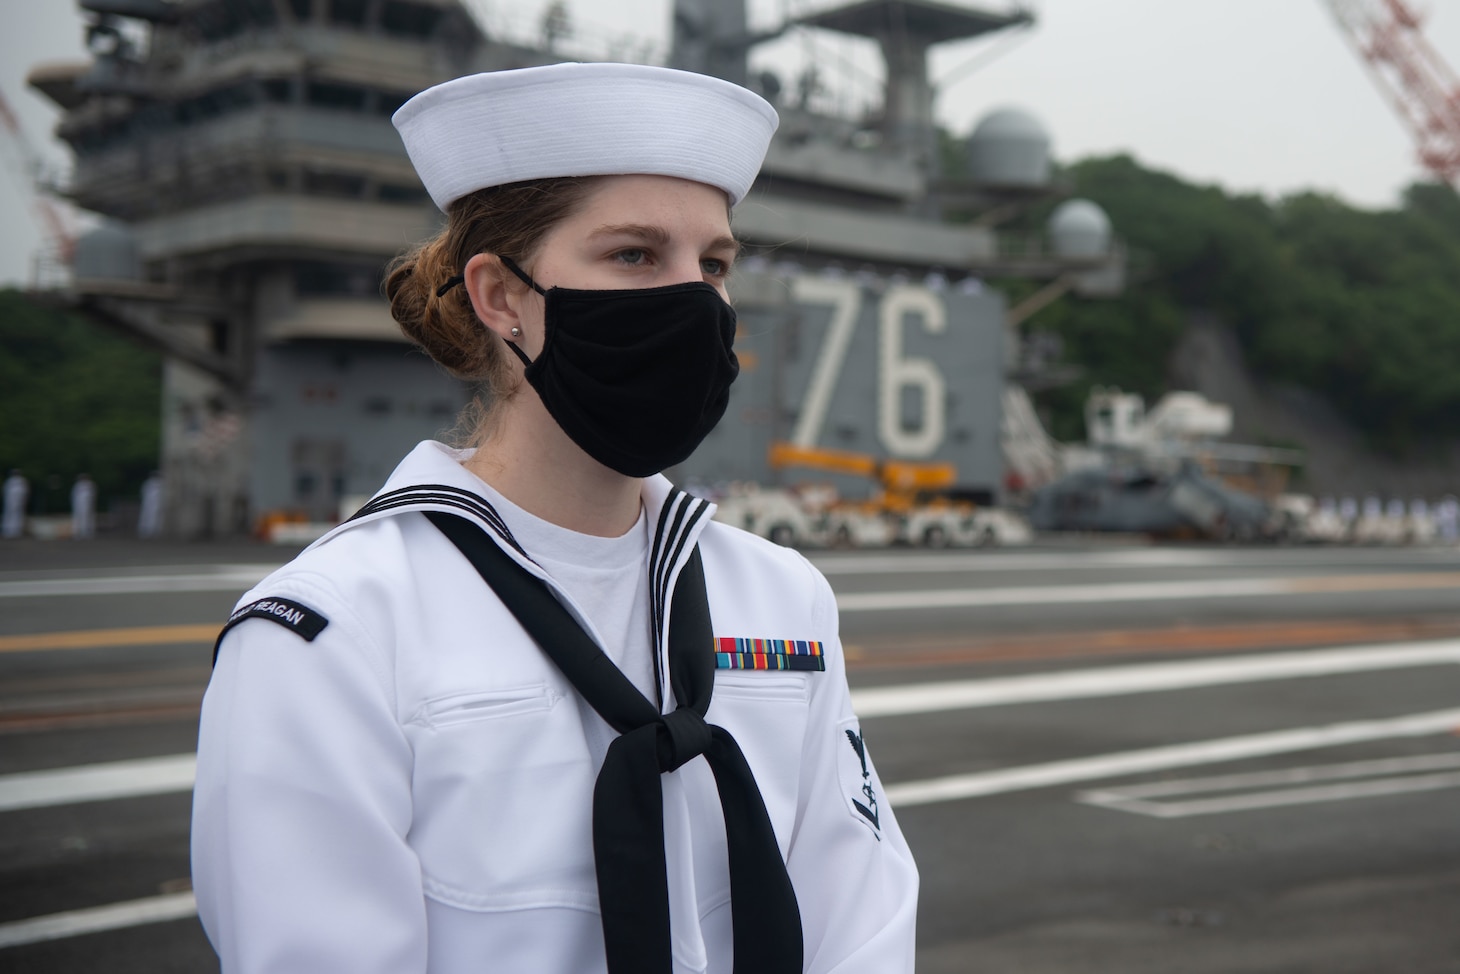 210519-N-LI114-1047 YOKOSUKA, Japan (May 19, 2021) Mass Communication Specialist 3rd Class Jillian Grady, from Waretown, New Jersey mans the rails on the flight deck of the U.S. Navy’s only forward-deployed aircraft carrier USS Ronald Reagan (CVN 76) as it departs Commander, Fleet Activities Yokosuka, Japan. Ronald Reagan, the flagship of Carrier Strike Group Five, provides a combat-ready force that protects and defends the United States, as well as the collective maritime interests of its allies and partners in the Indo-Pacific region. (U.S. Navy Photo by Mass Communication Specialist 3rd Class Michael B. Jarmiolowski)